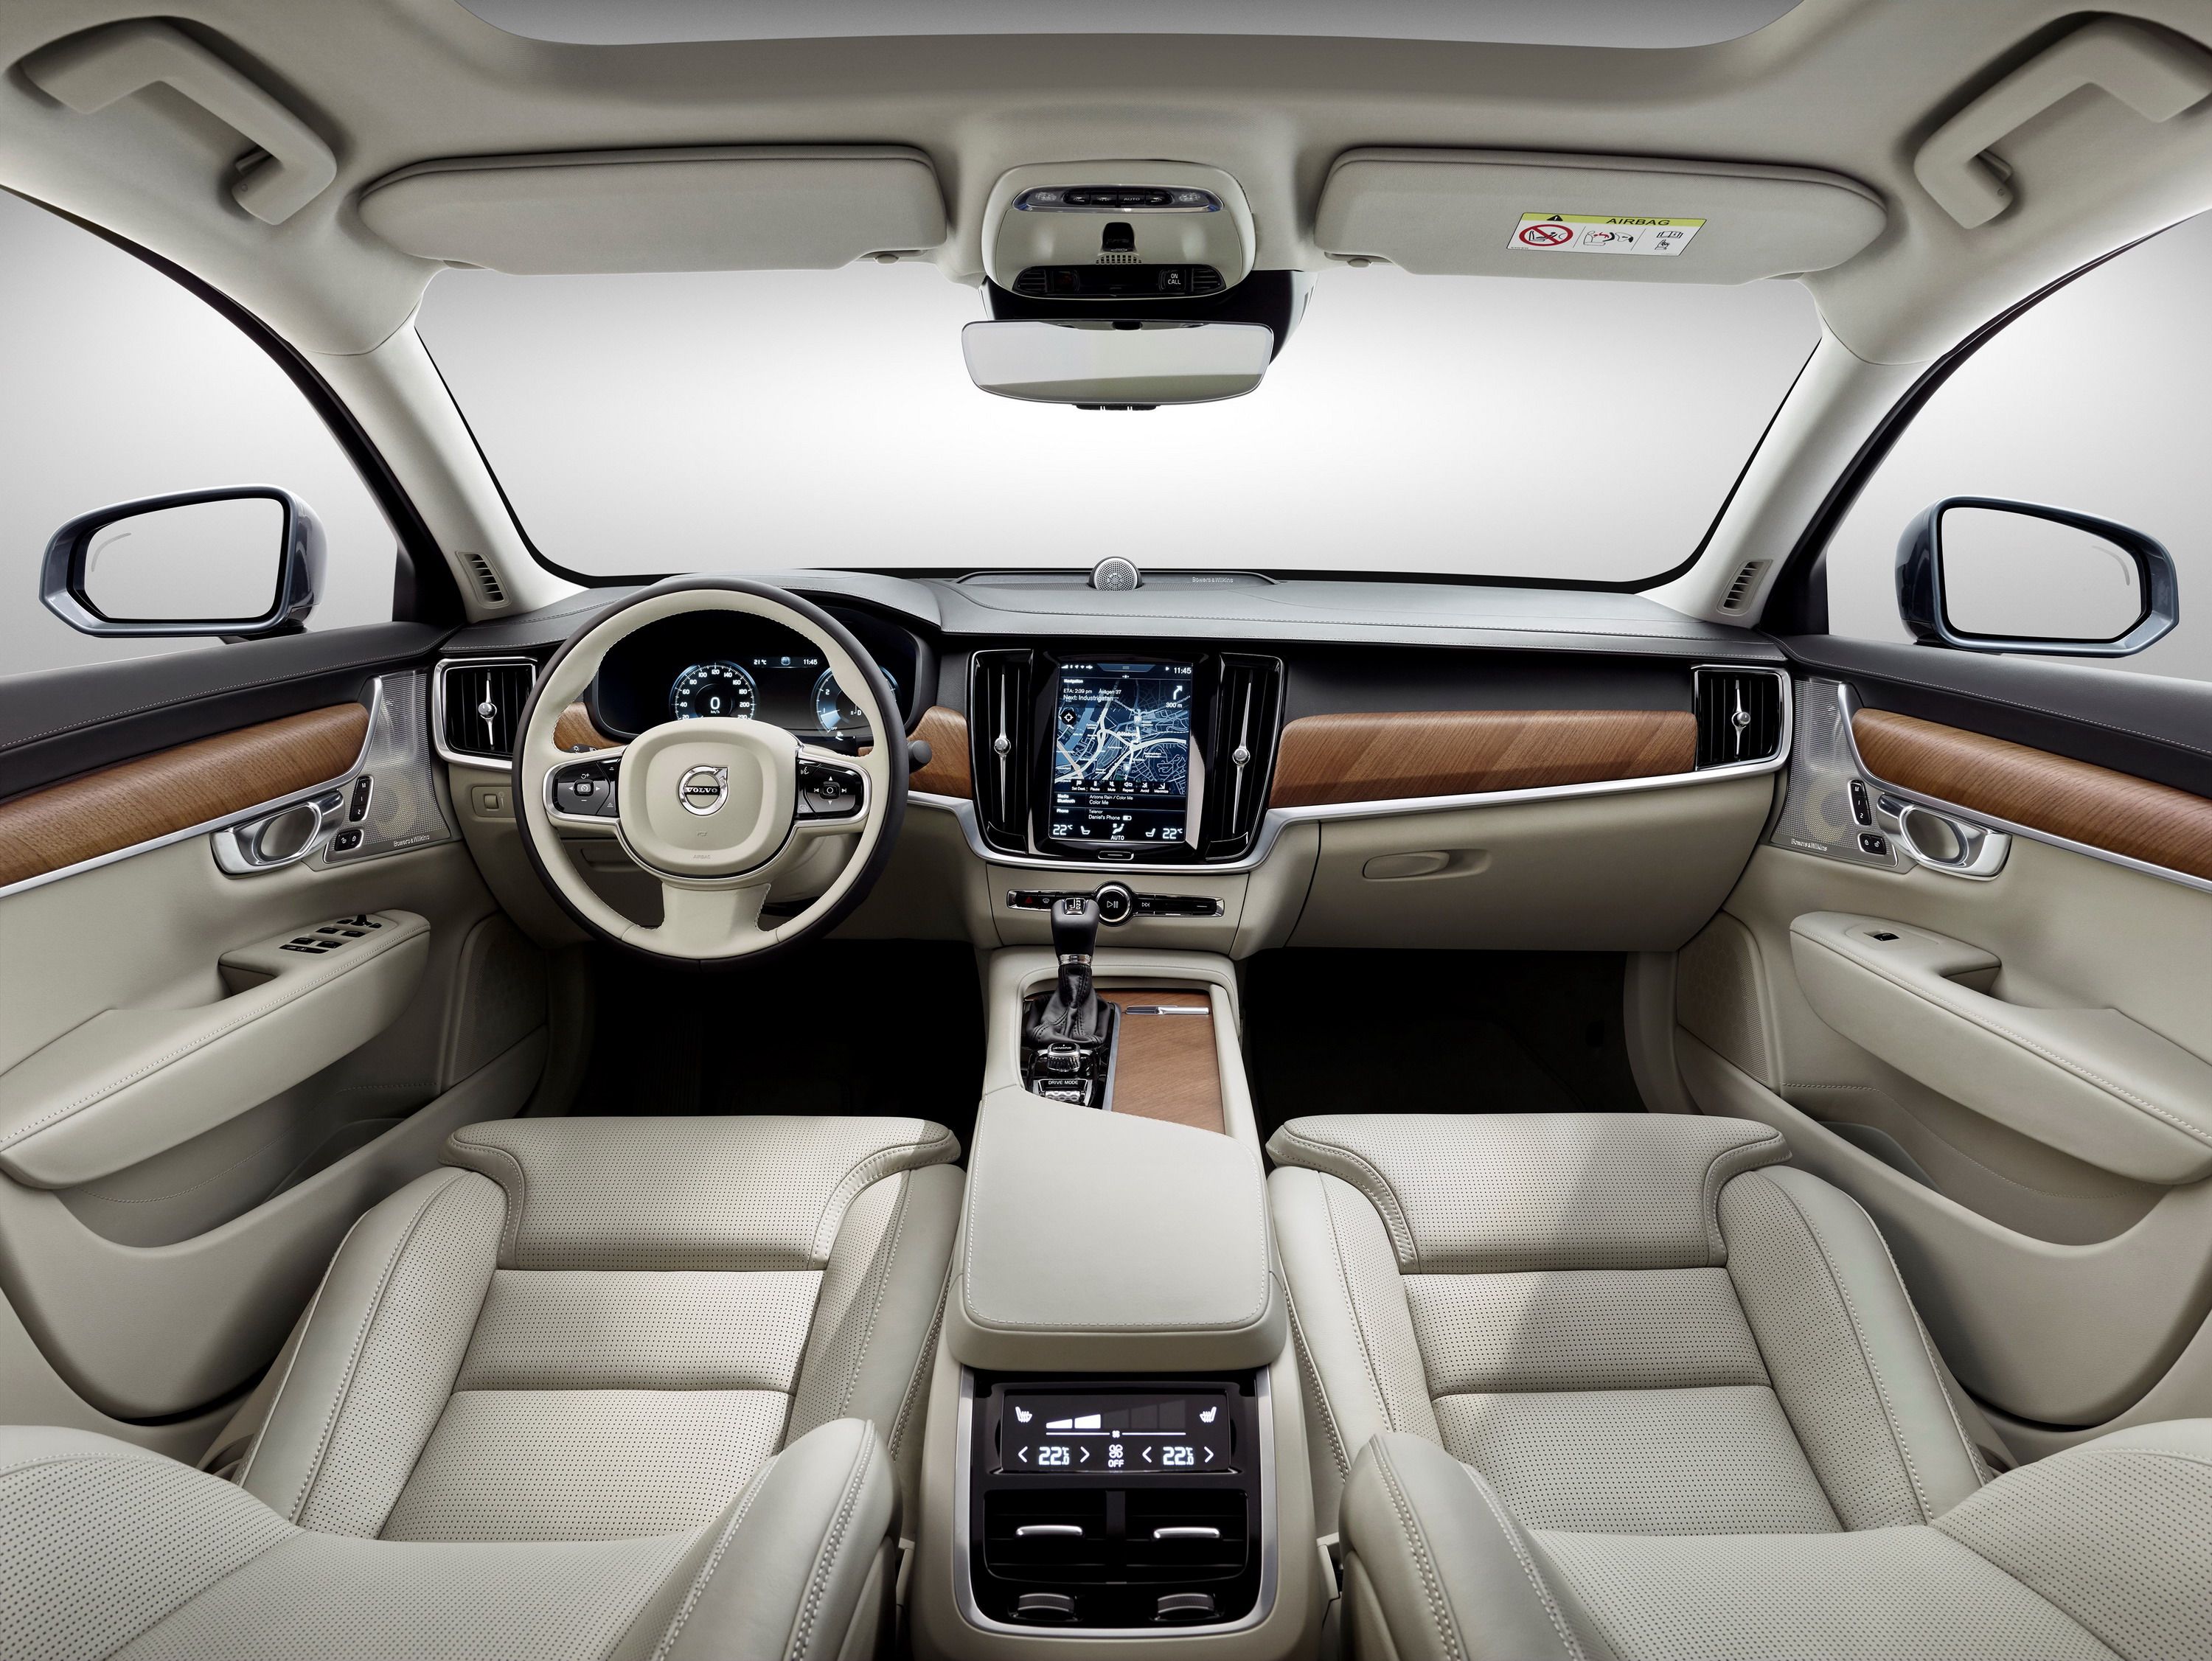 The S90 gets a luxurious cabin